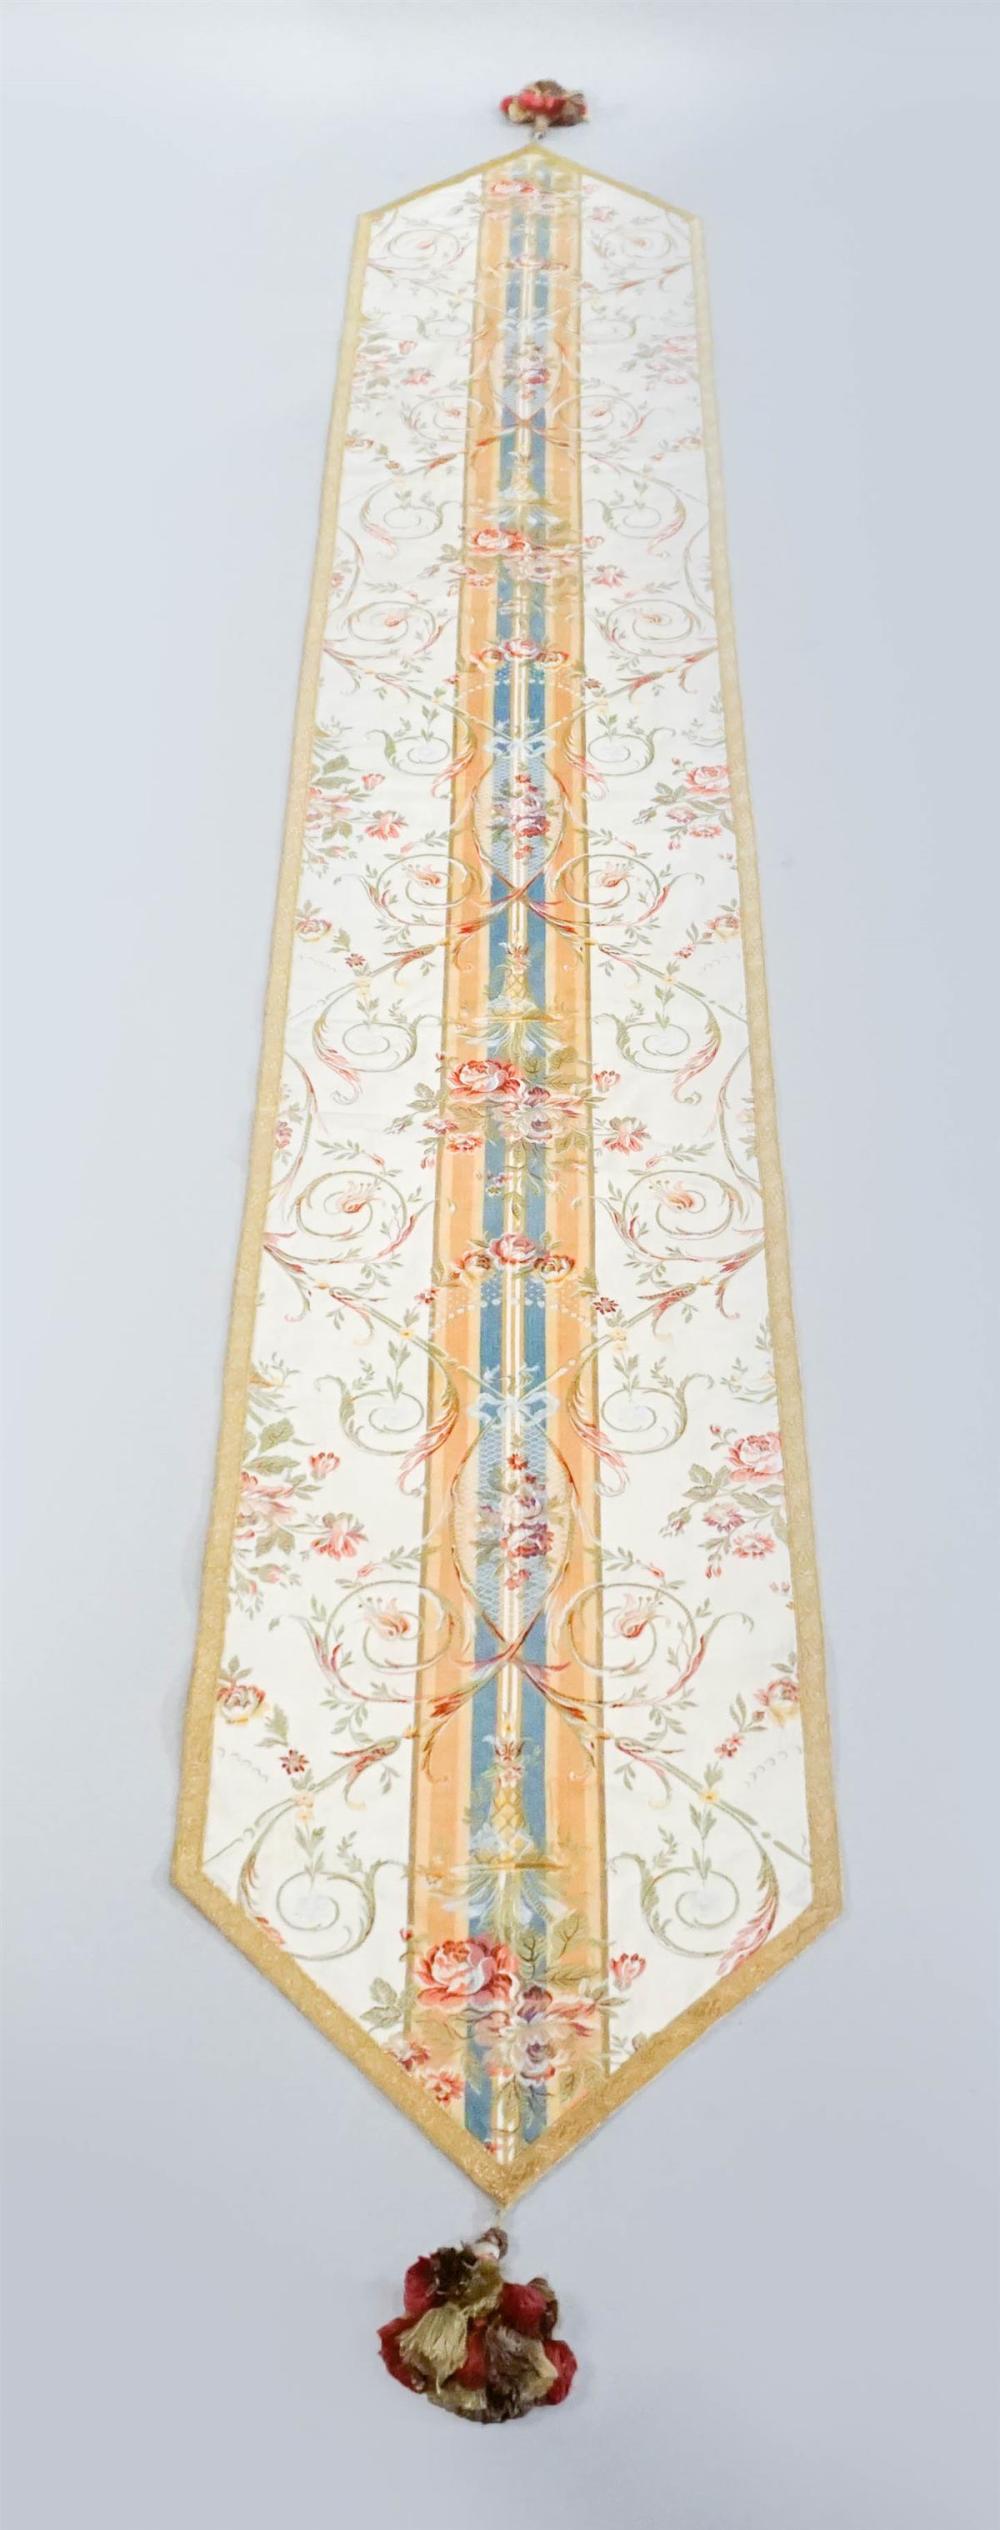 FRENCH BROCADE TABLE RUNNERFRENCH